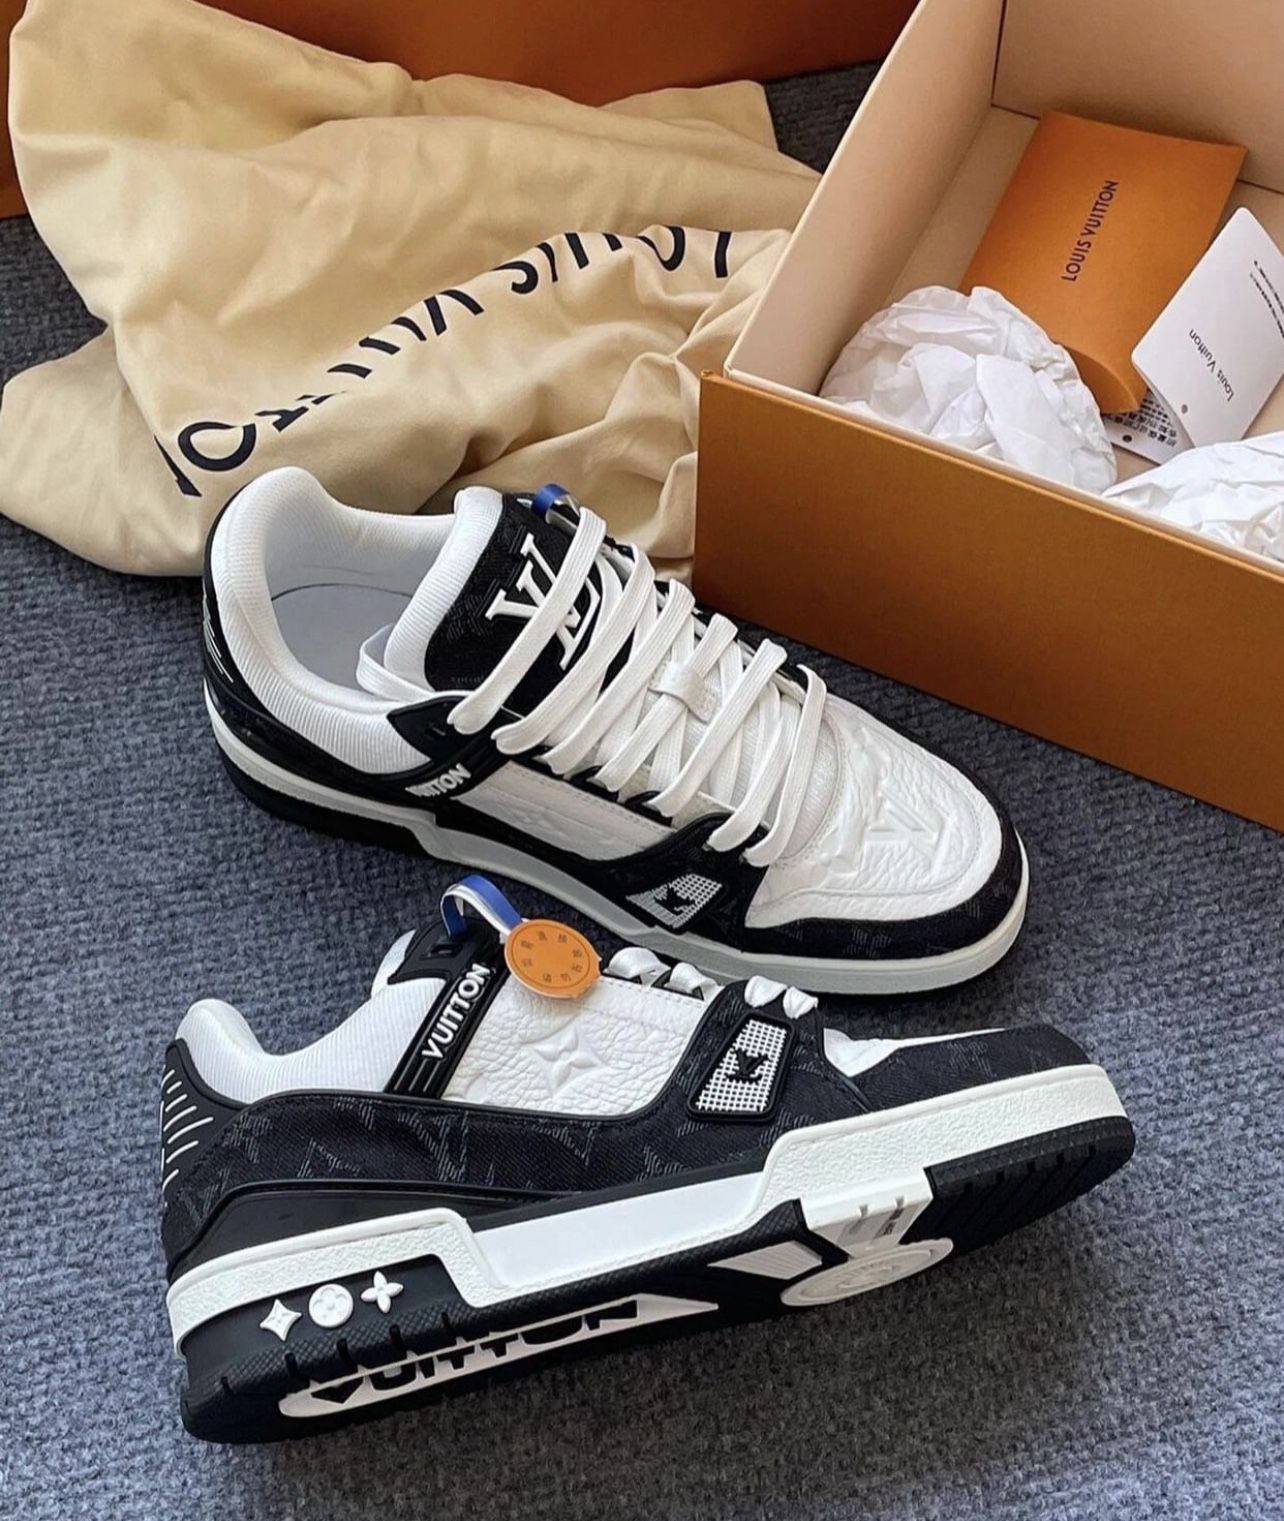 Louis Vuitton Trainer sneaker for Sale in Bowie, MD - OfferUp